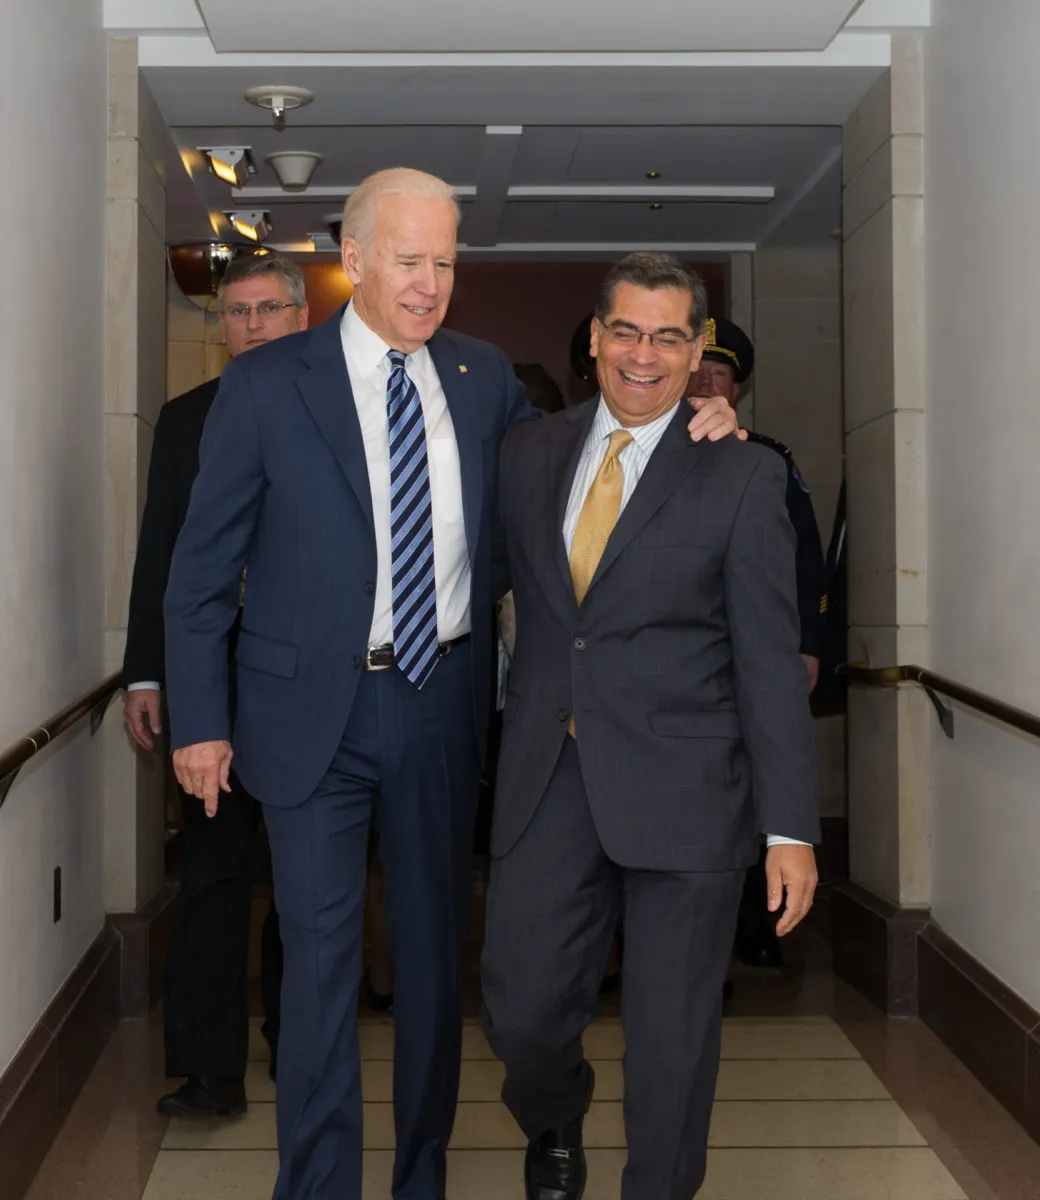 Xavier Becerra ’80 J.D. ’84: The path to the president’s Cabinet